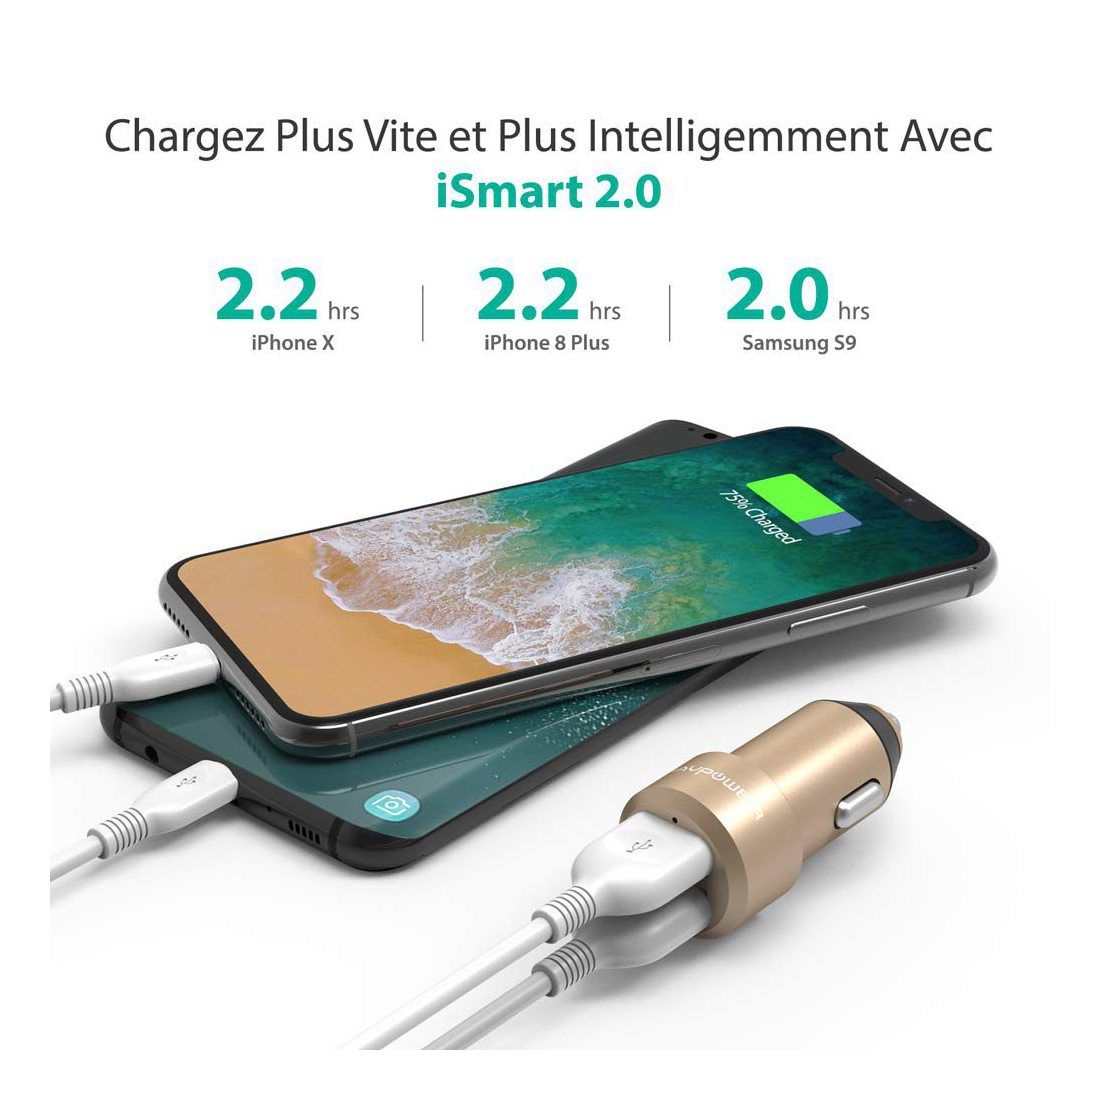 X 6s S6 RAVPower Extra Mini Chargeur Voiture Allume Cigare 2 Ports USB 24W 5V 4,8A iSmart en Alliage dAluminium Compatible avec iPhone XS/XS Max/XR 7 6 8 Or Galaxy S7 Plus Edge 